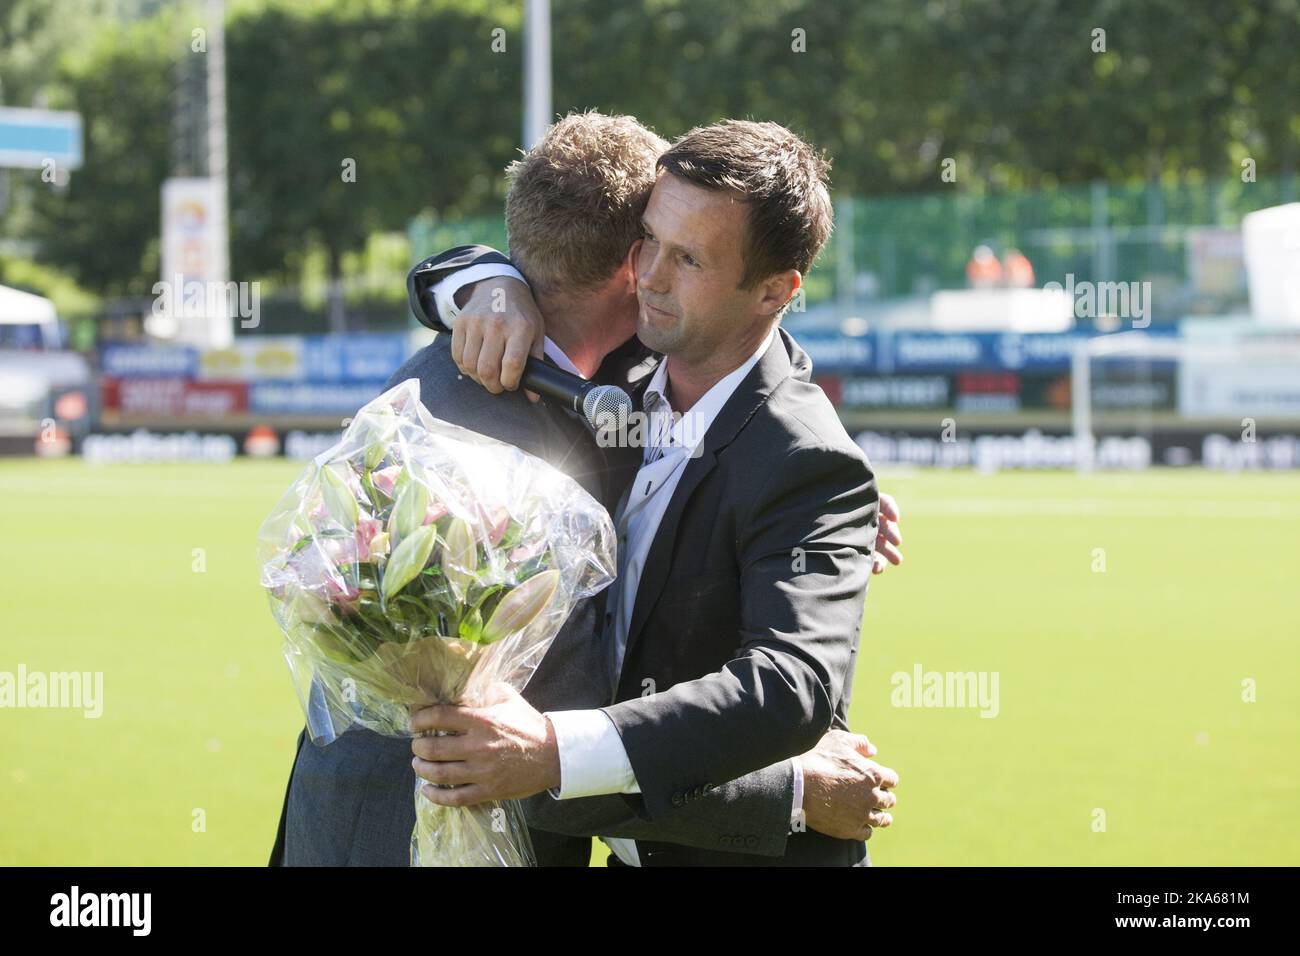 Outgoing manager of Stromsgodset FK and incoming manager of Scottish Premiership club Celtic Ronny Deila (R) is given flowers by Director of Football in Stromsgodset, Jostein Flo after half time of the match between Deila`s former club Stromsgodset and Haugesund in the Norwegian top football league in Drammen, 9 June 2014. Photo by Audun Braastad, NTB scanpix Stock Photo